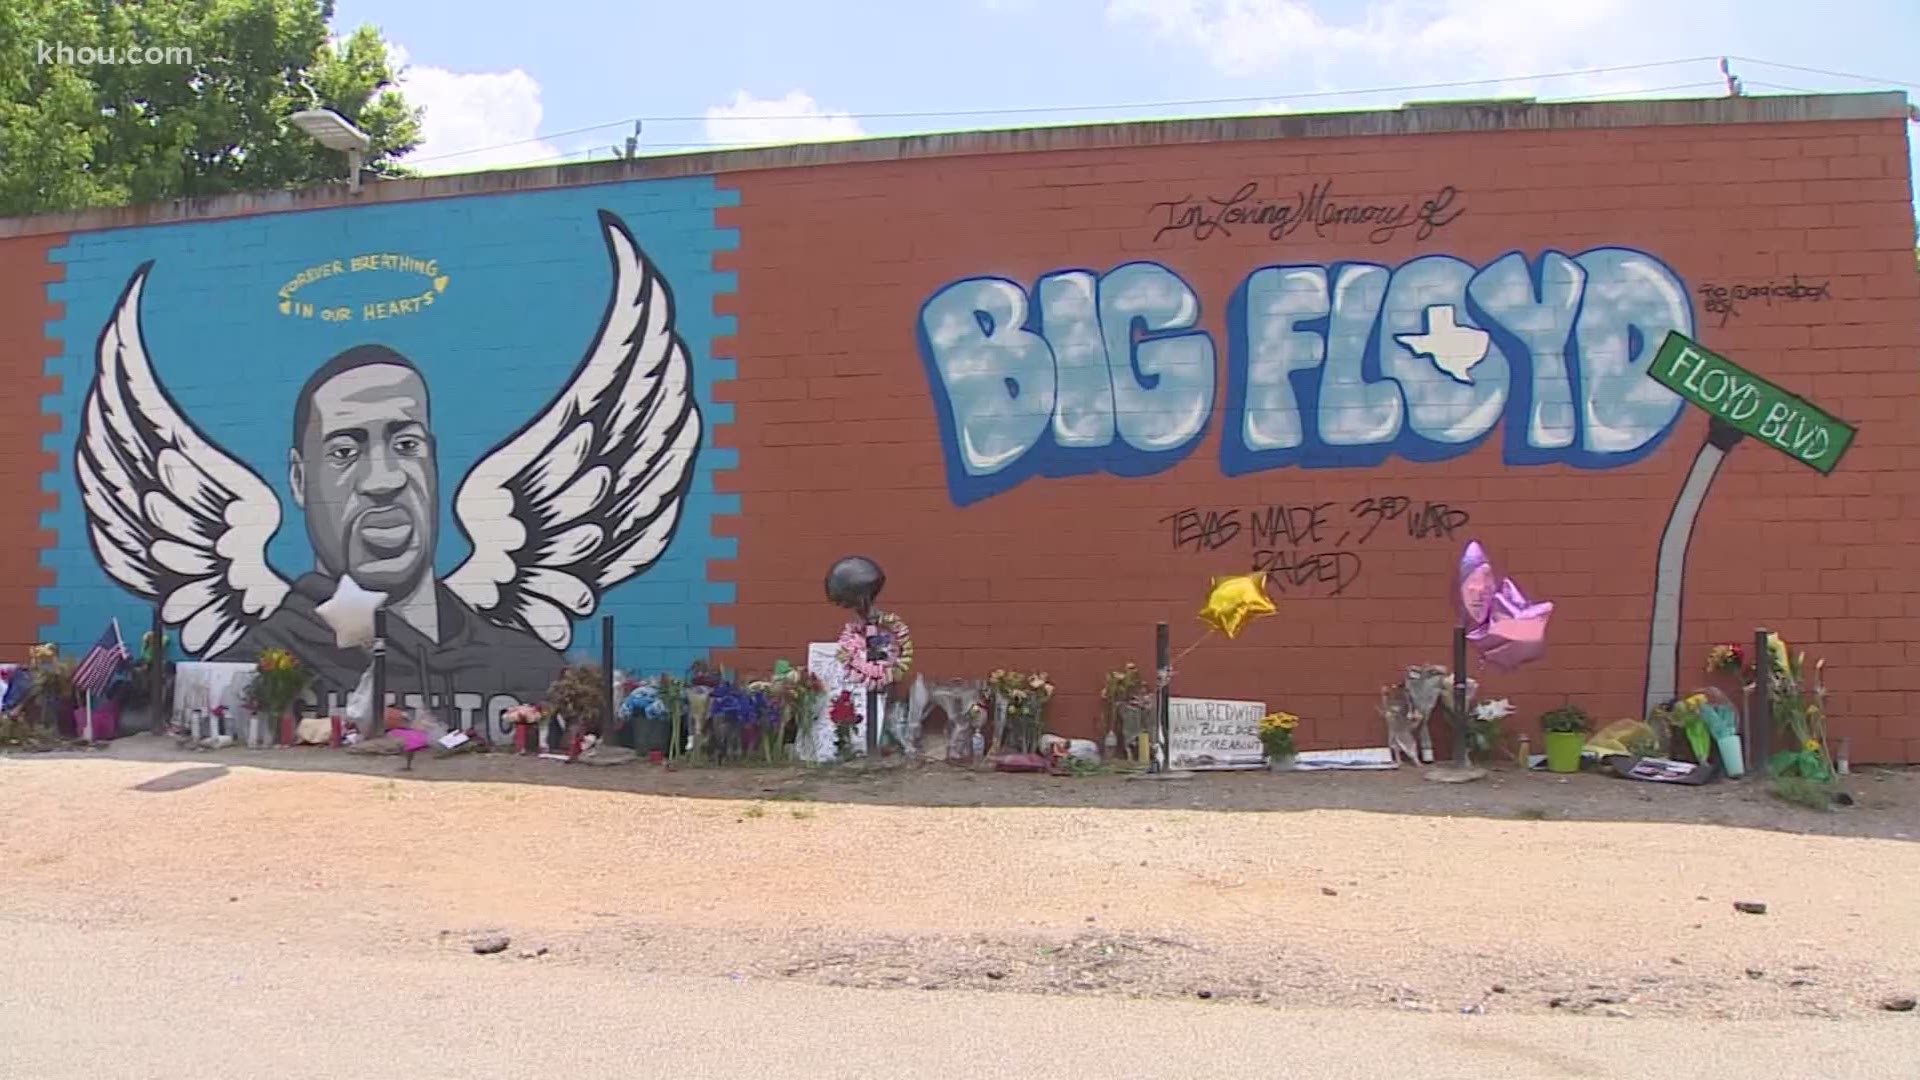 The mural, painted by Houston artist Donkeeboy, is meant to keep Floyd’s memory alive.